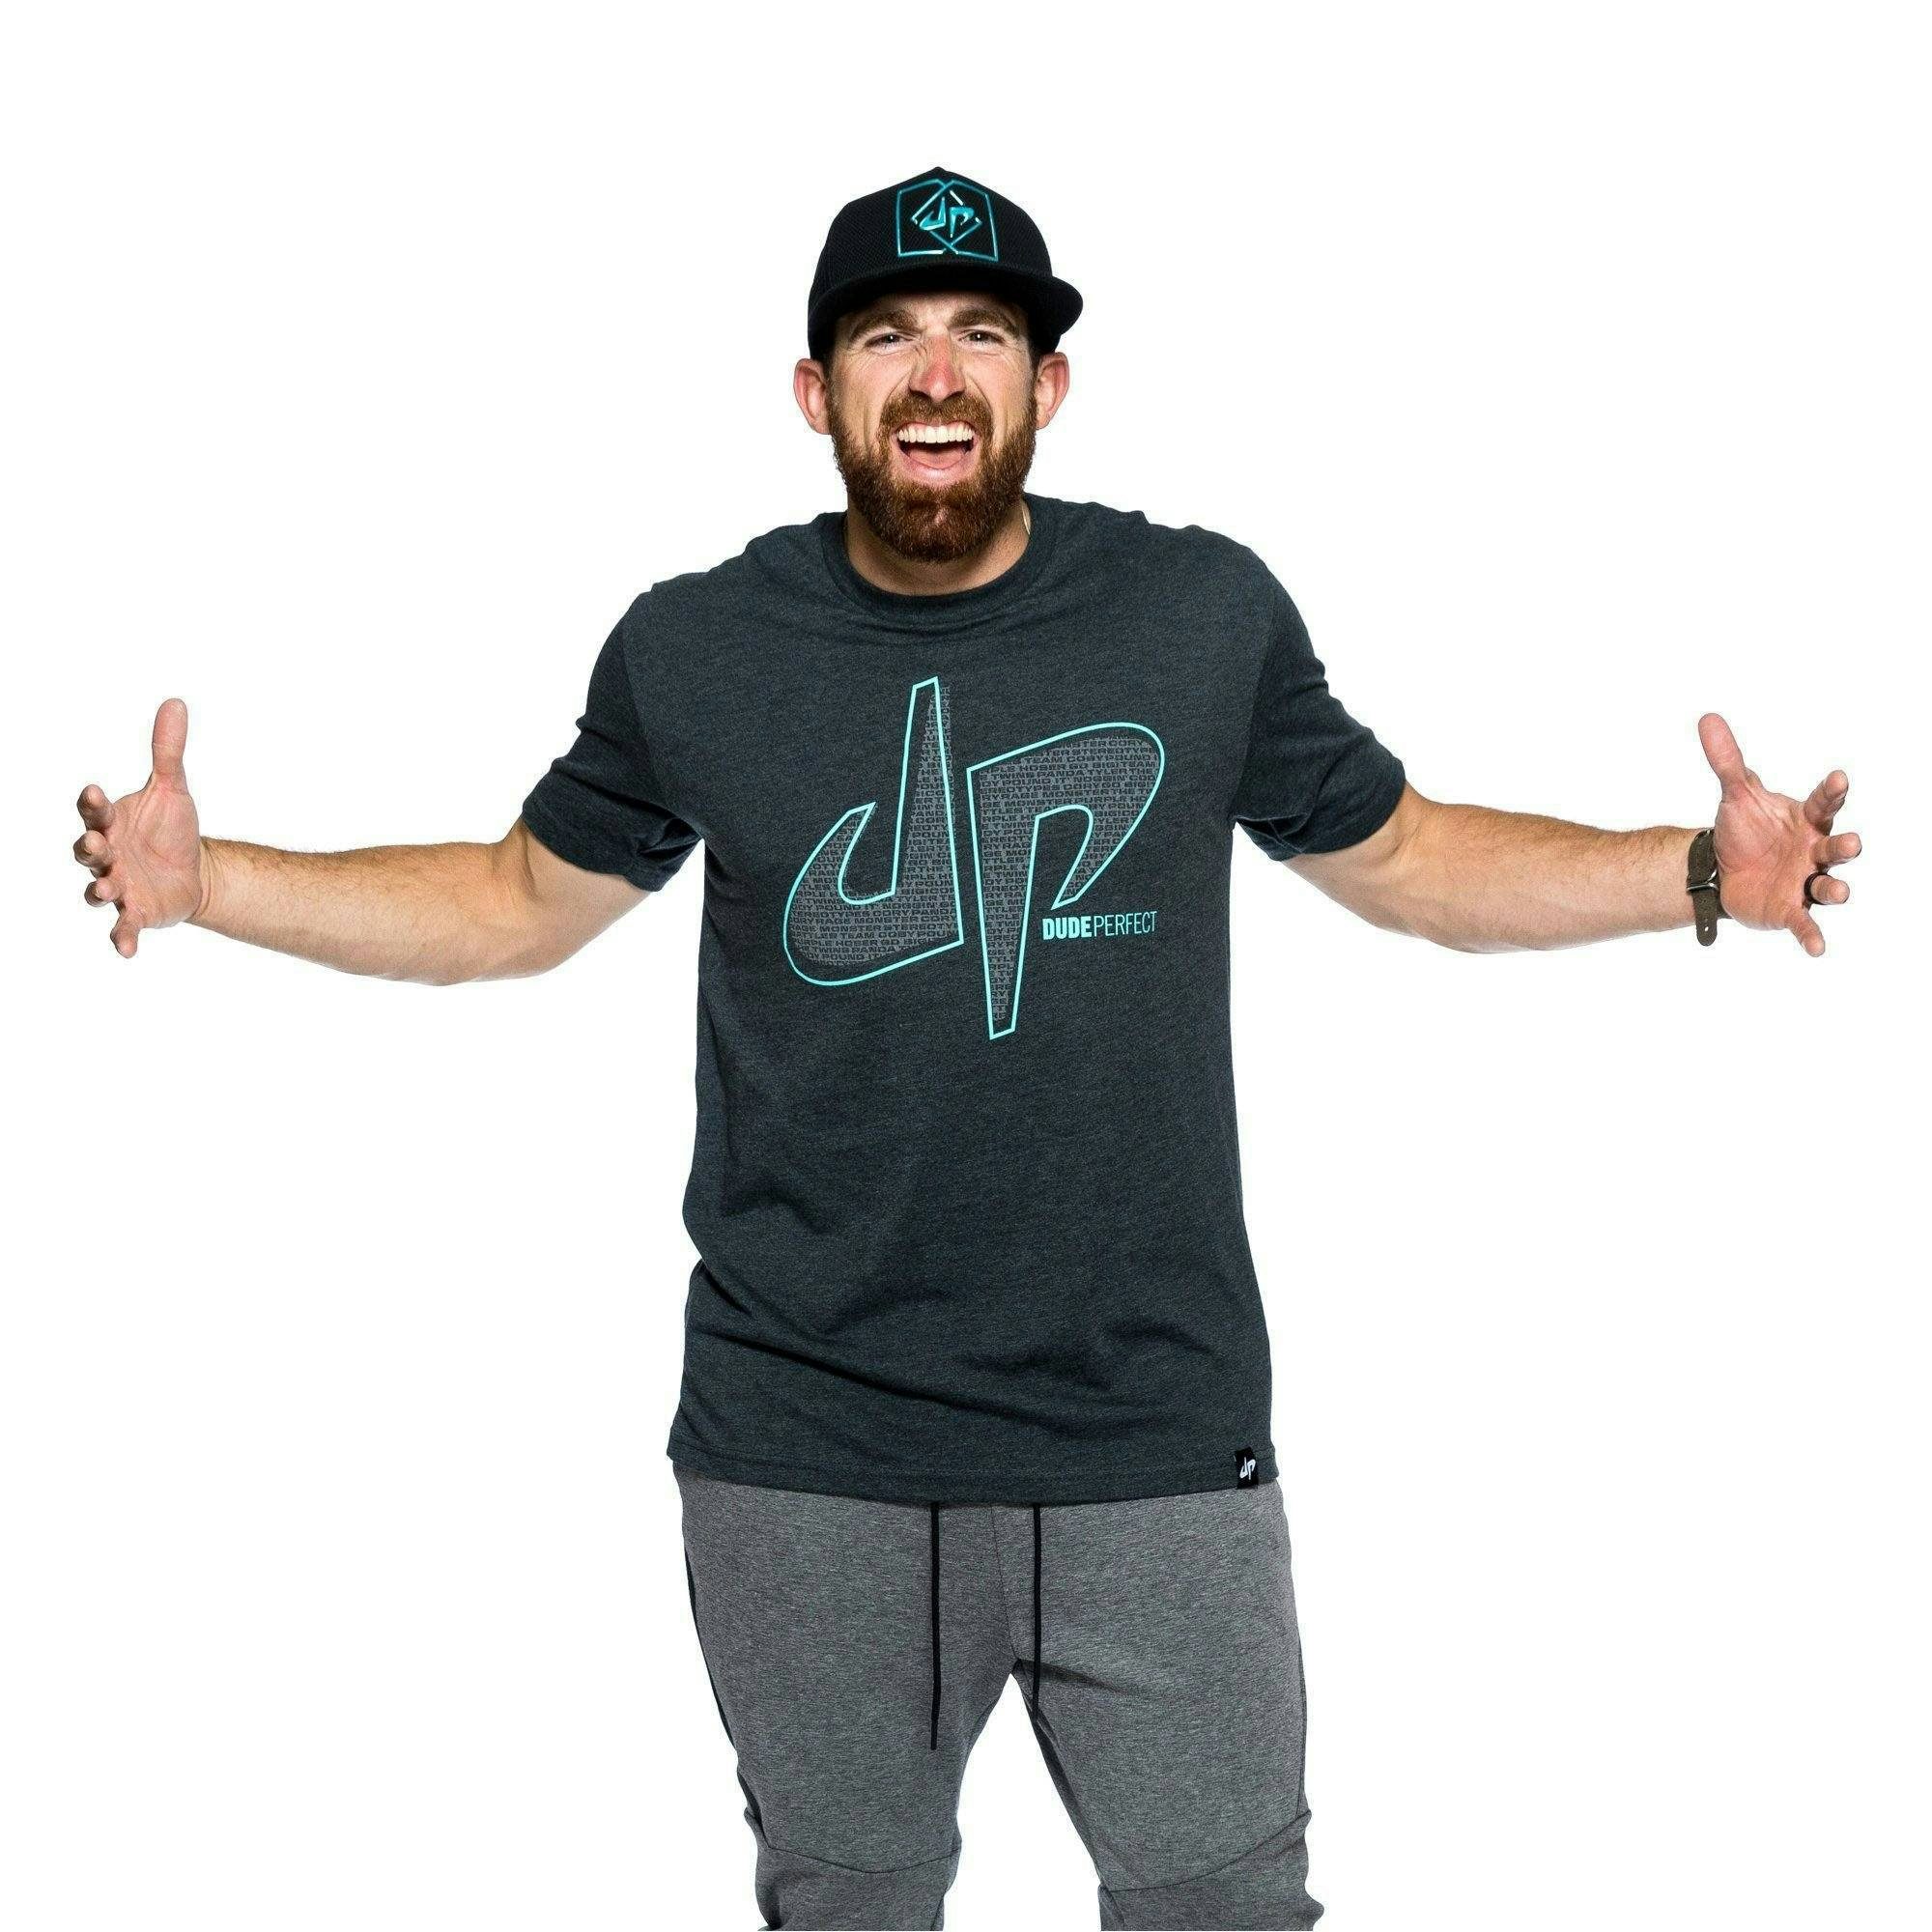 Dude Perfect Pound It Reflective Tee 